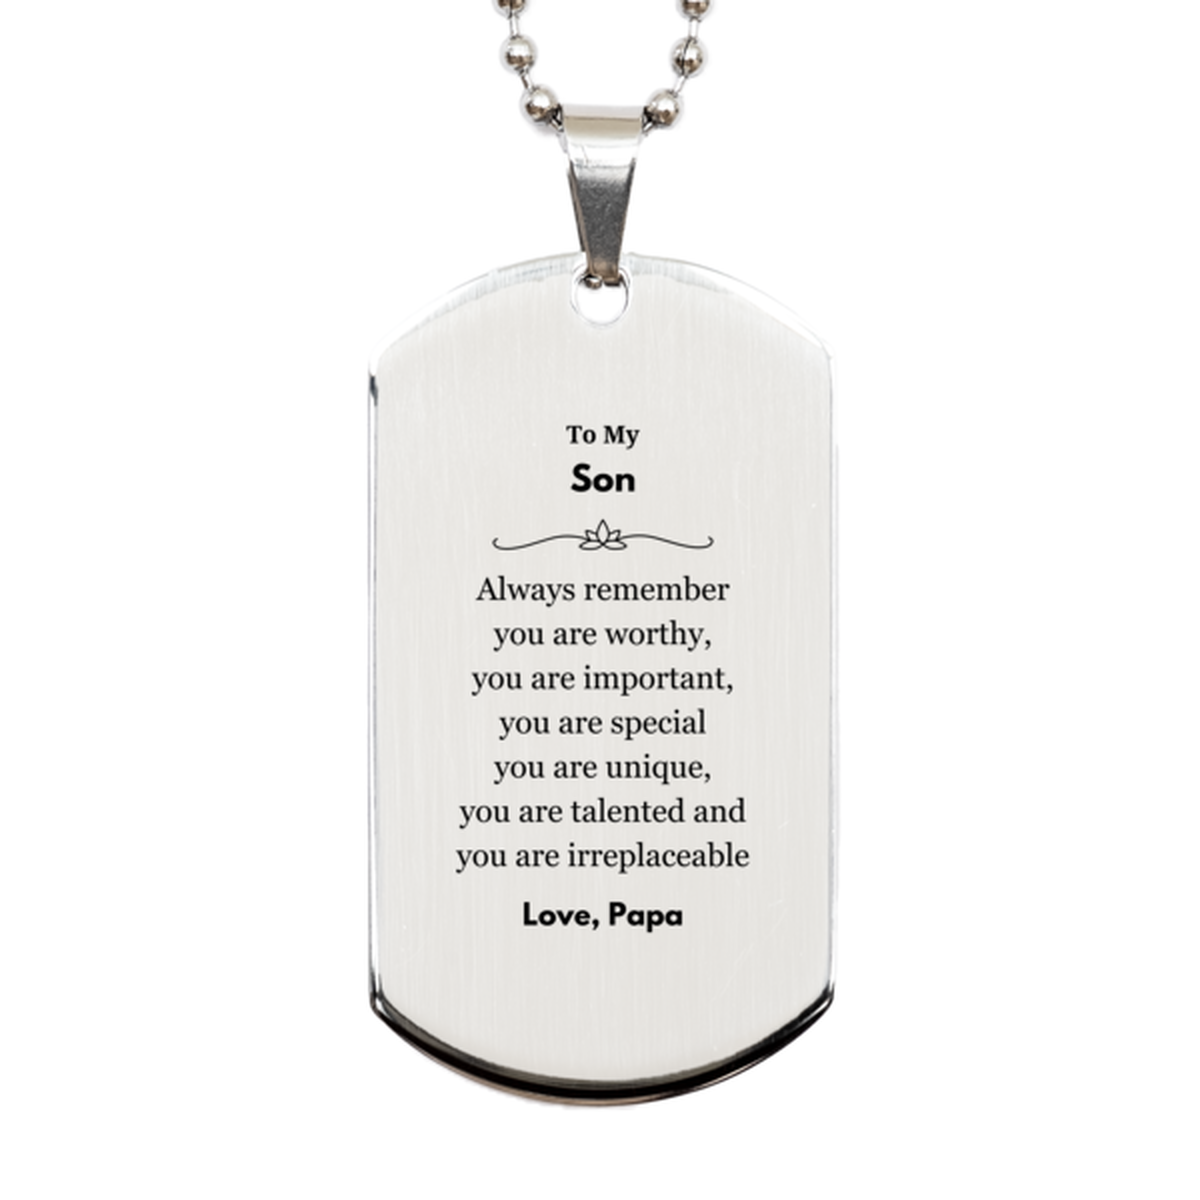 Son Birthday Gifts from Papa, Inspirational Silver Dog Tag for Son Christmas Graduation Gifts for Son Always remember you are worthy, you are important. Love, Papa